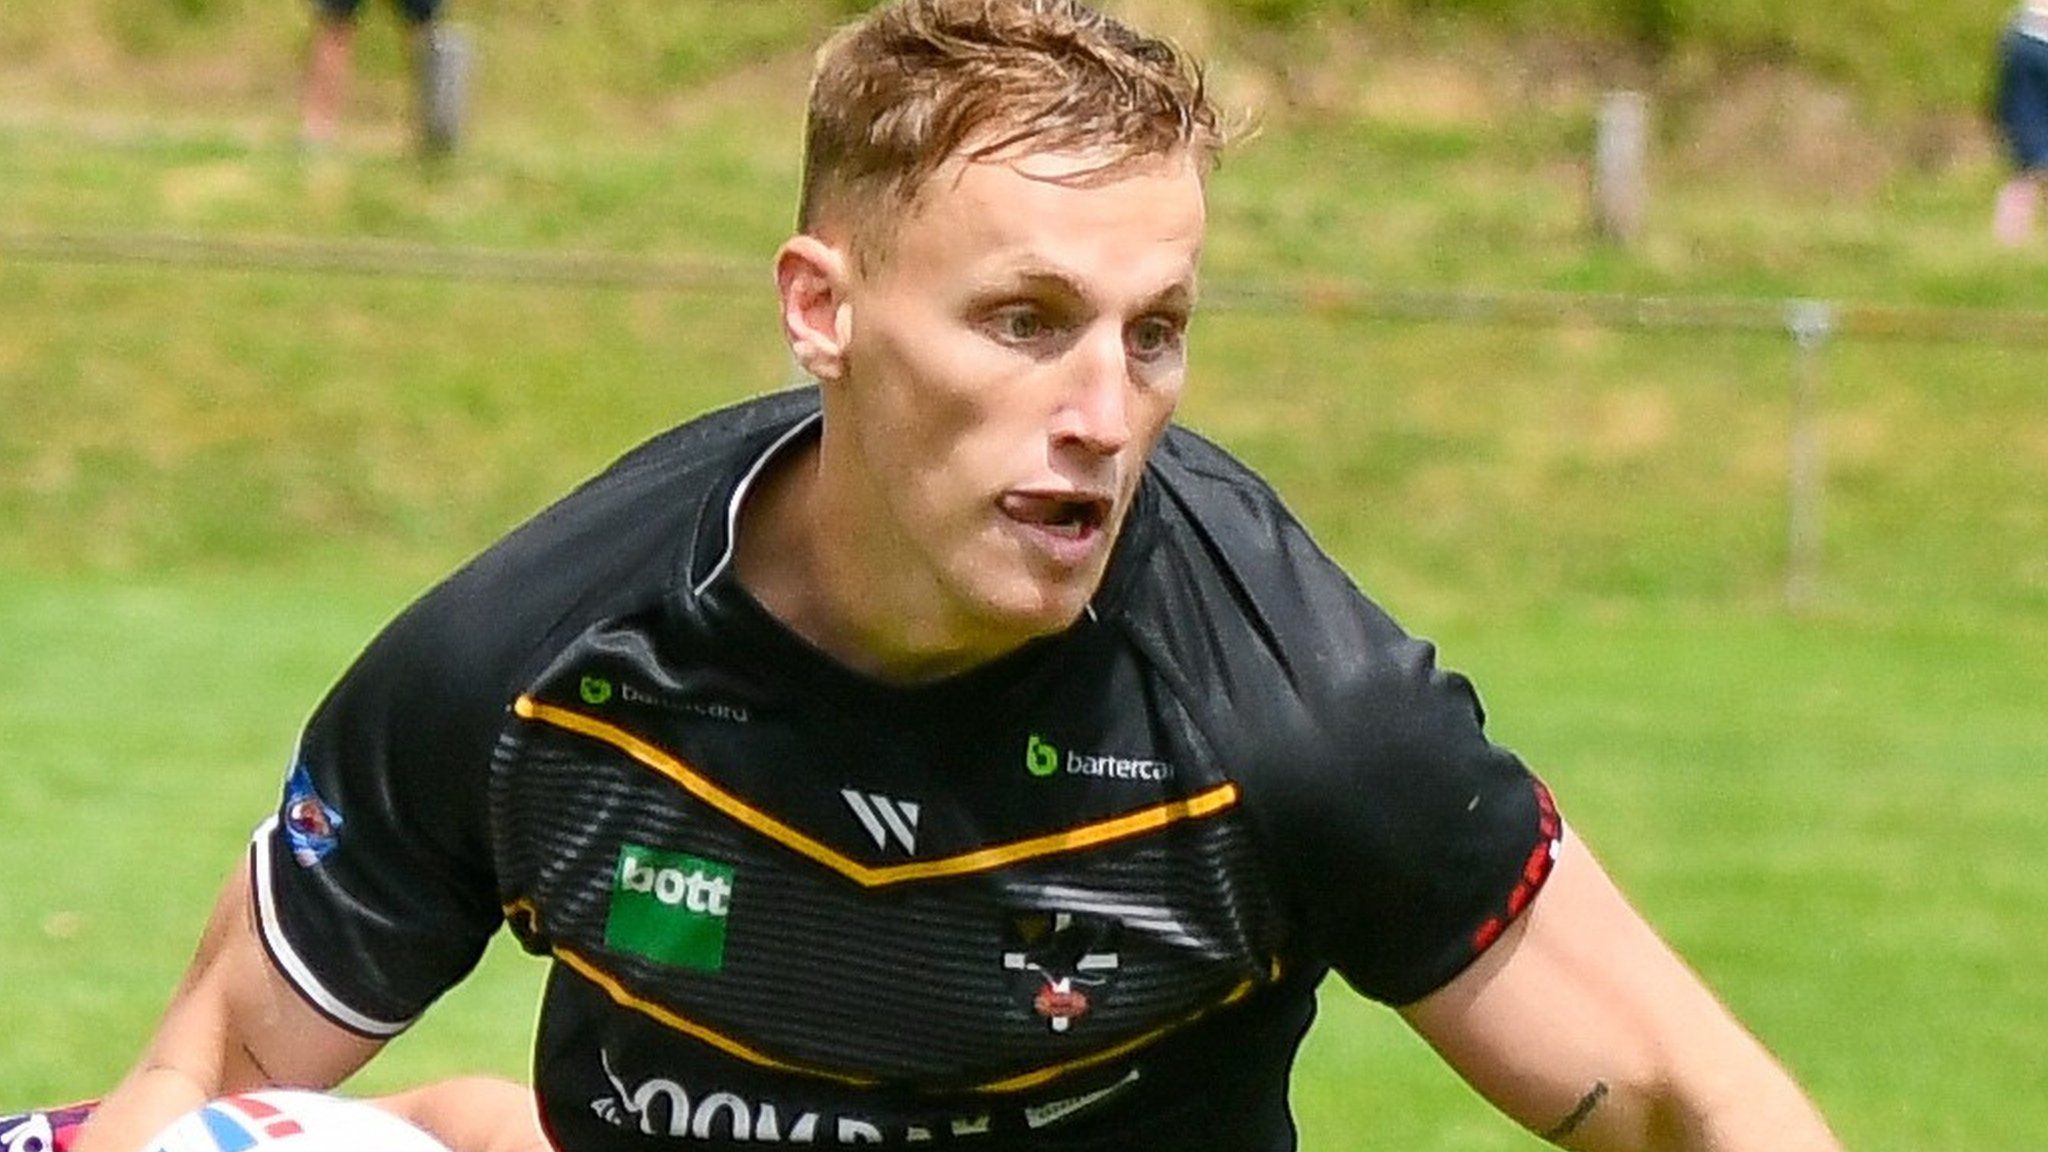 Cameron Brown in action for Cornwall